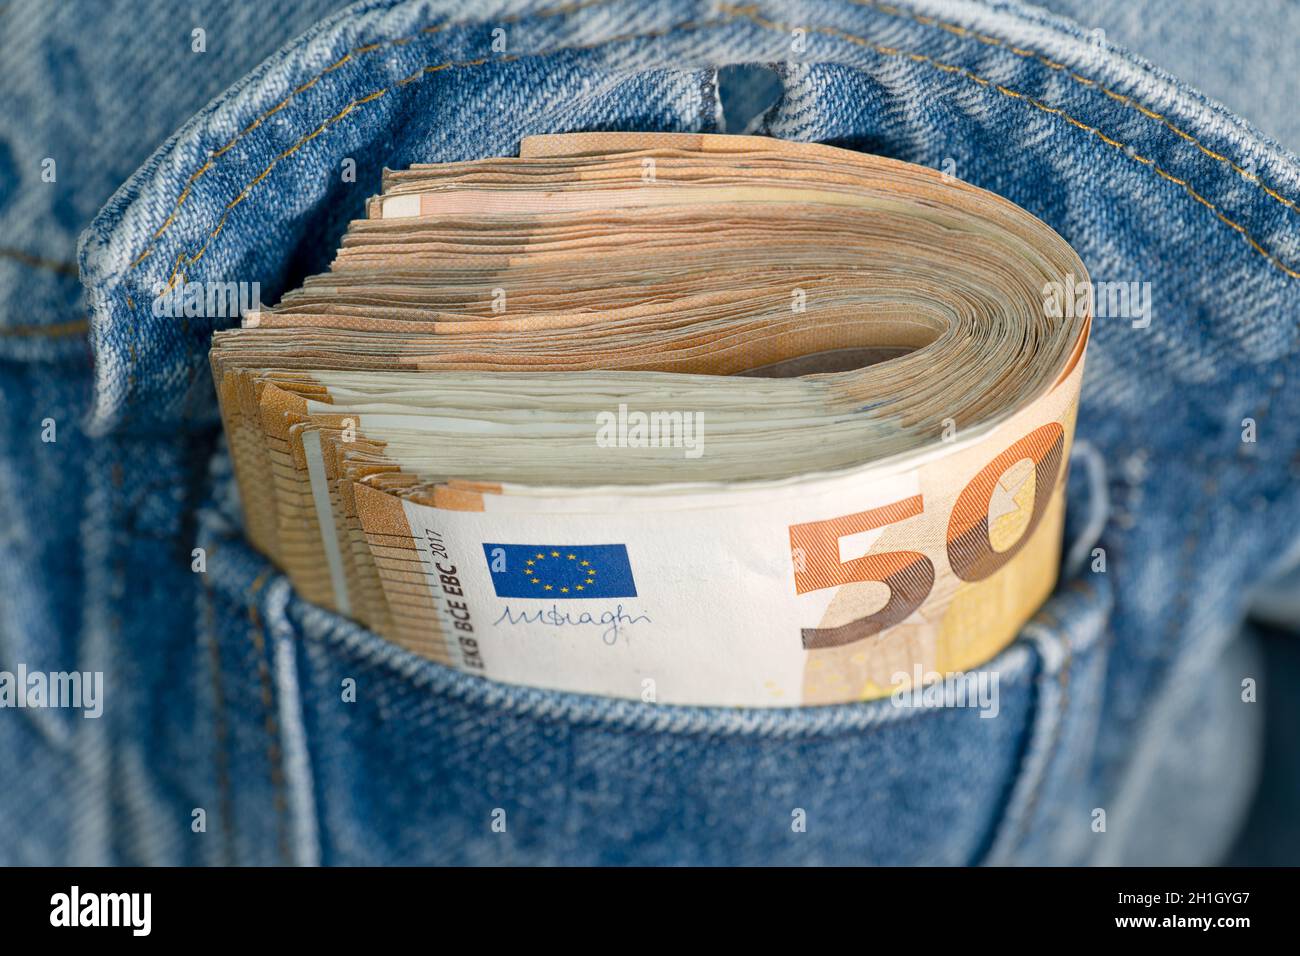 A bundle of 50 euro banknotes in pocket of a denim jacket Stock Photo